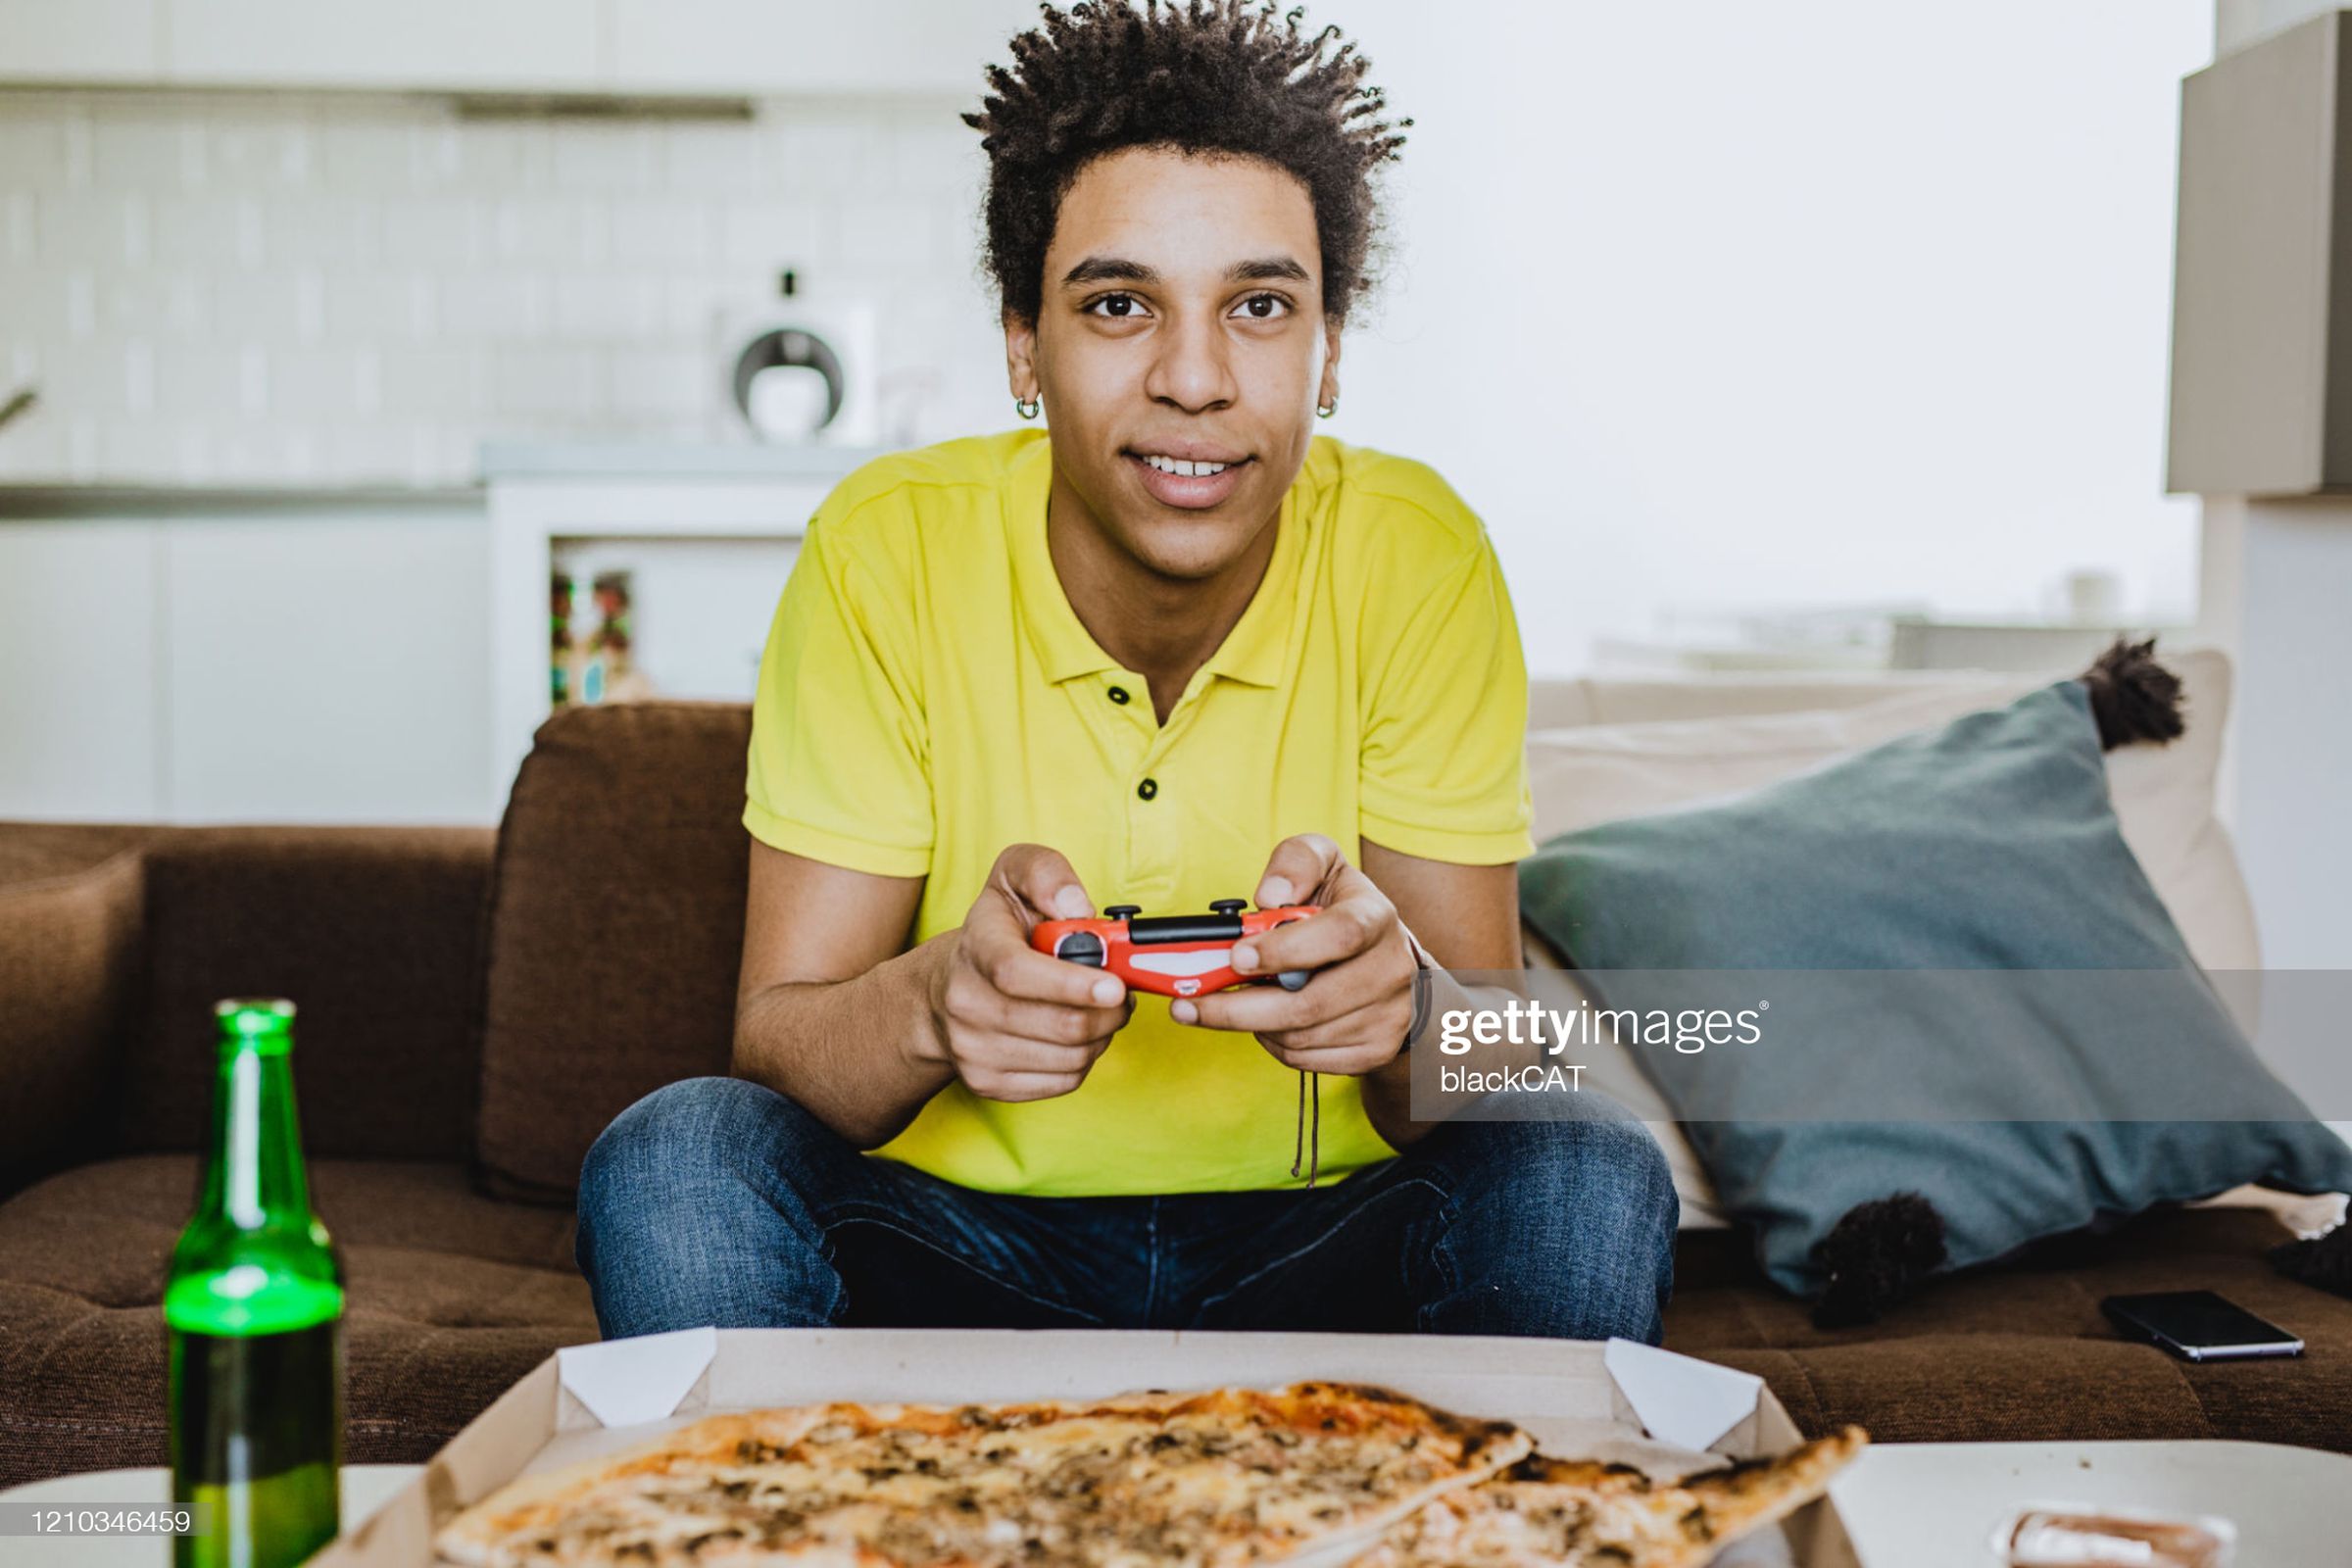 “Young African American man eating pizza, drinking beer and playing video games.”